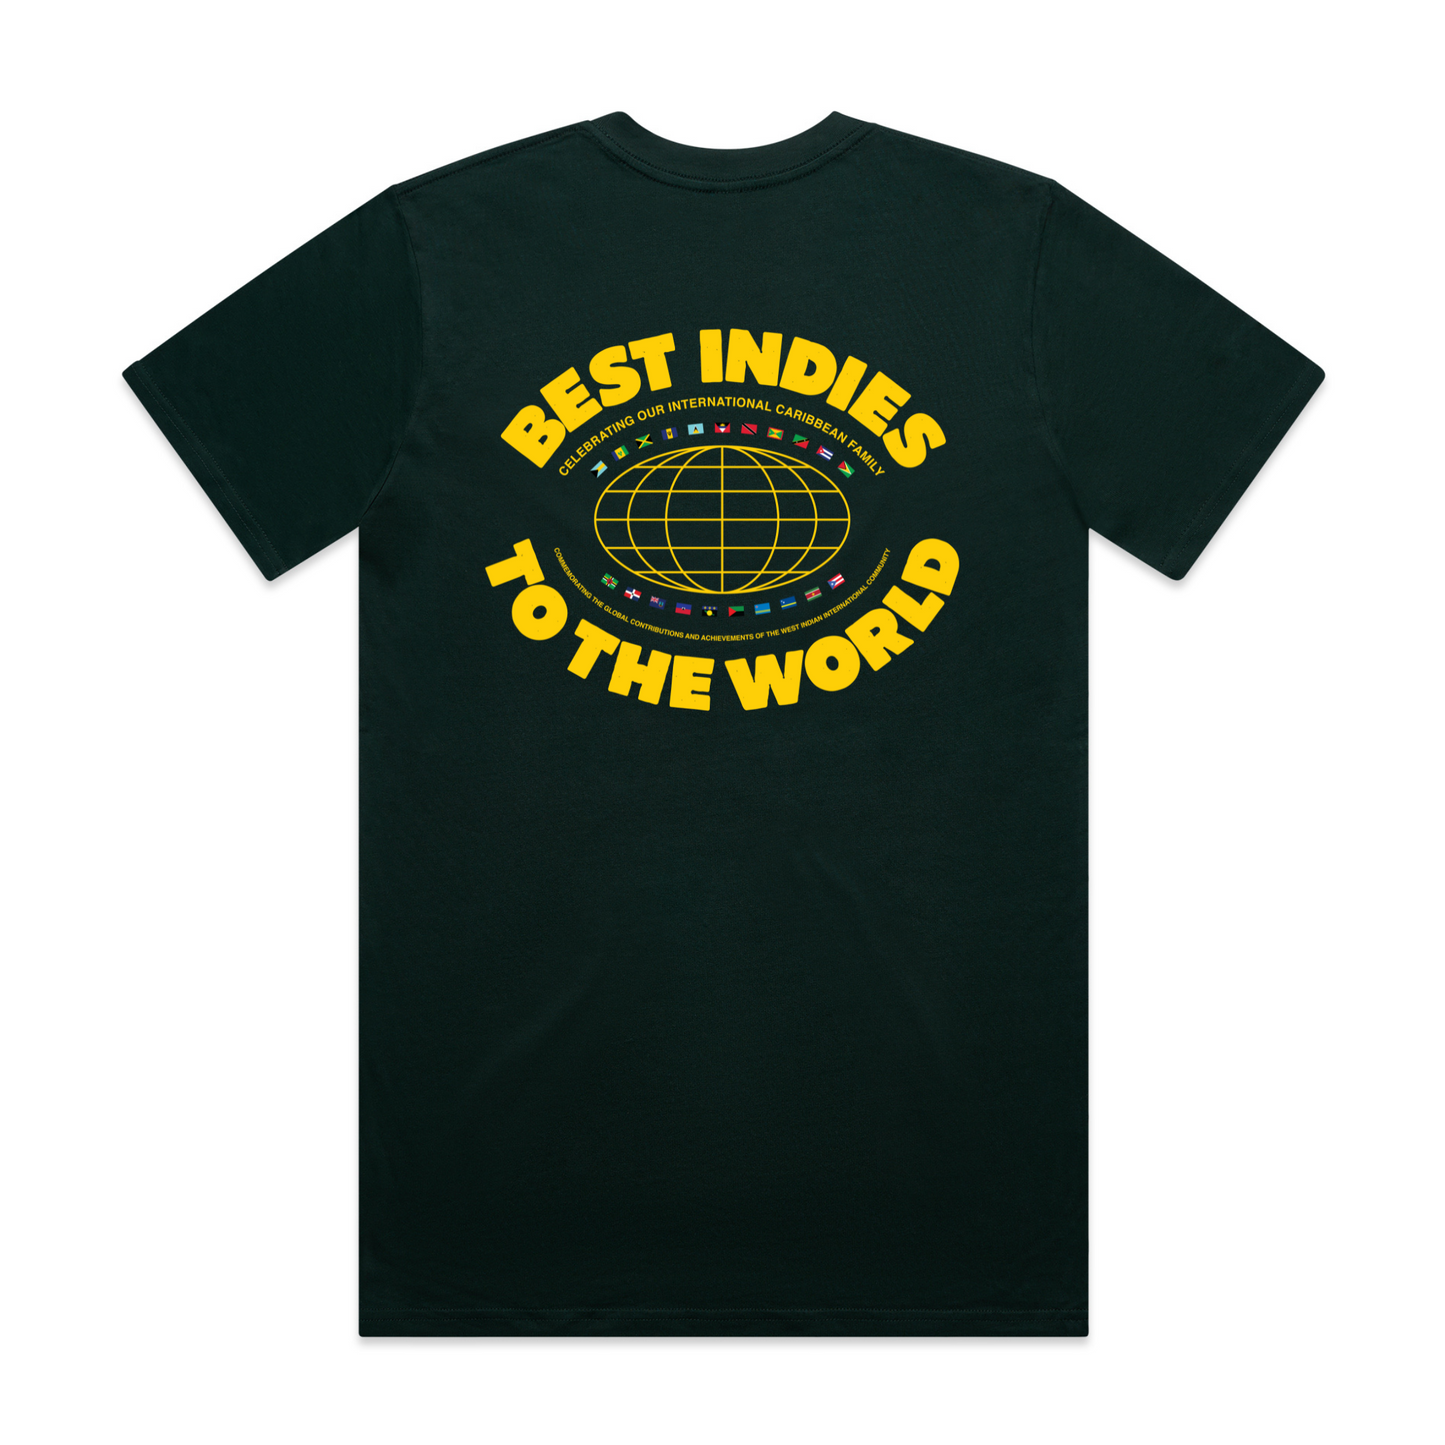 Best Indies To The World - Pine Green T-Shirt